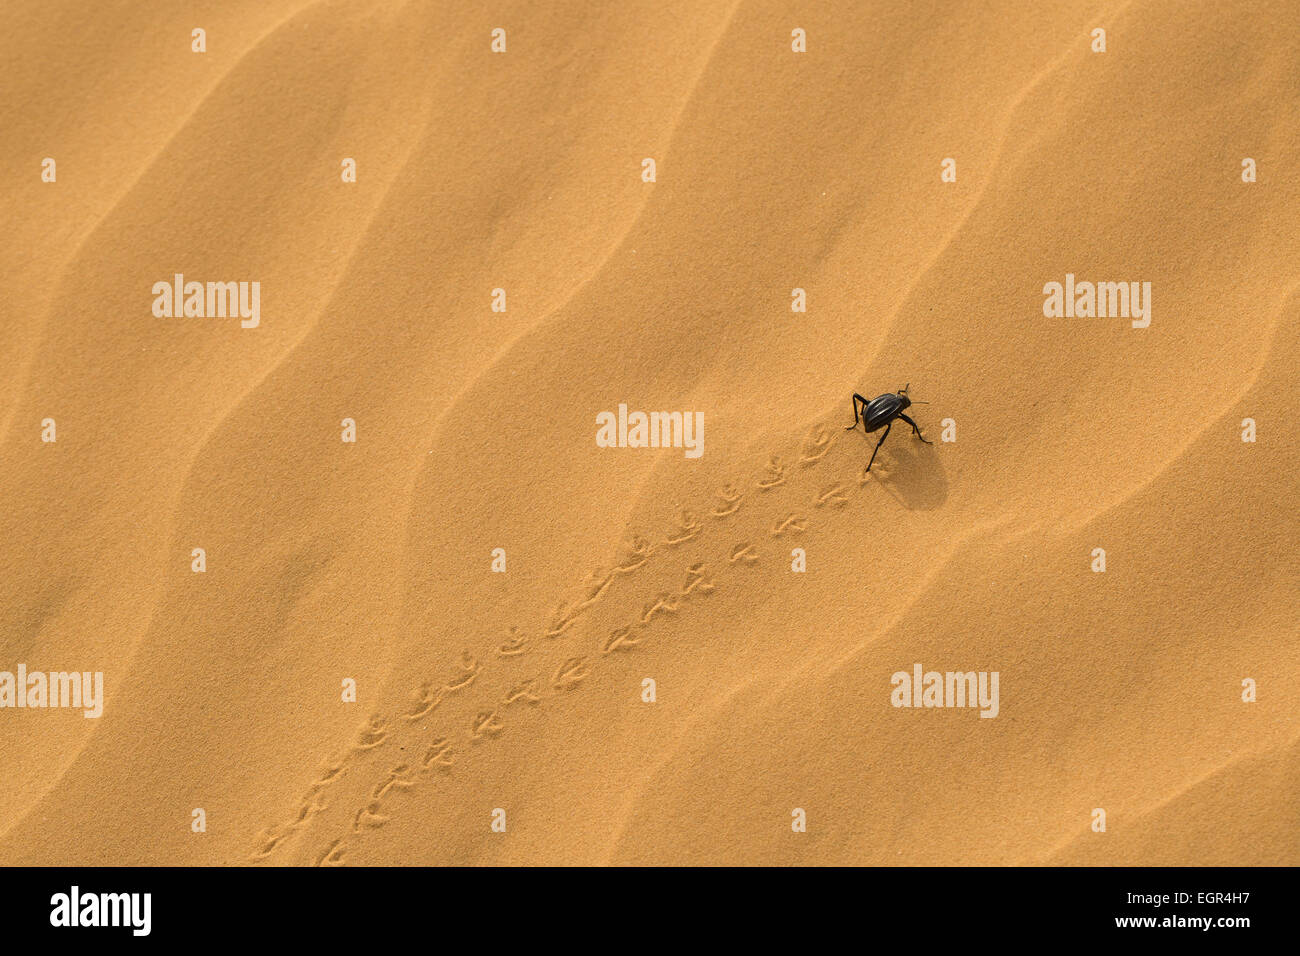 Adesmia dilatata beetle on a sand dune. Photographed in Israel in January Stock Photo